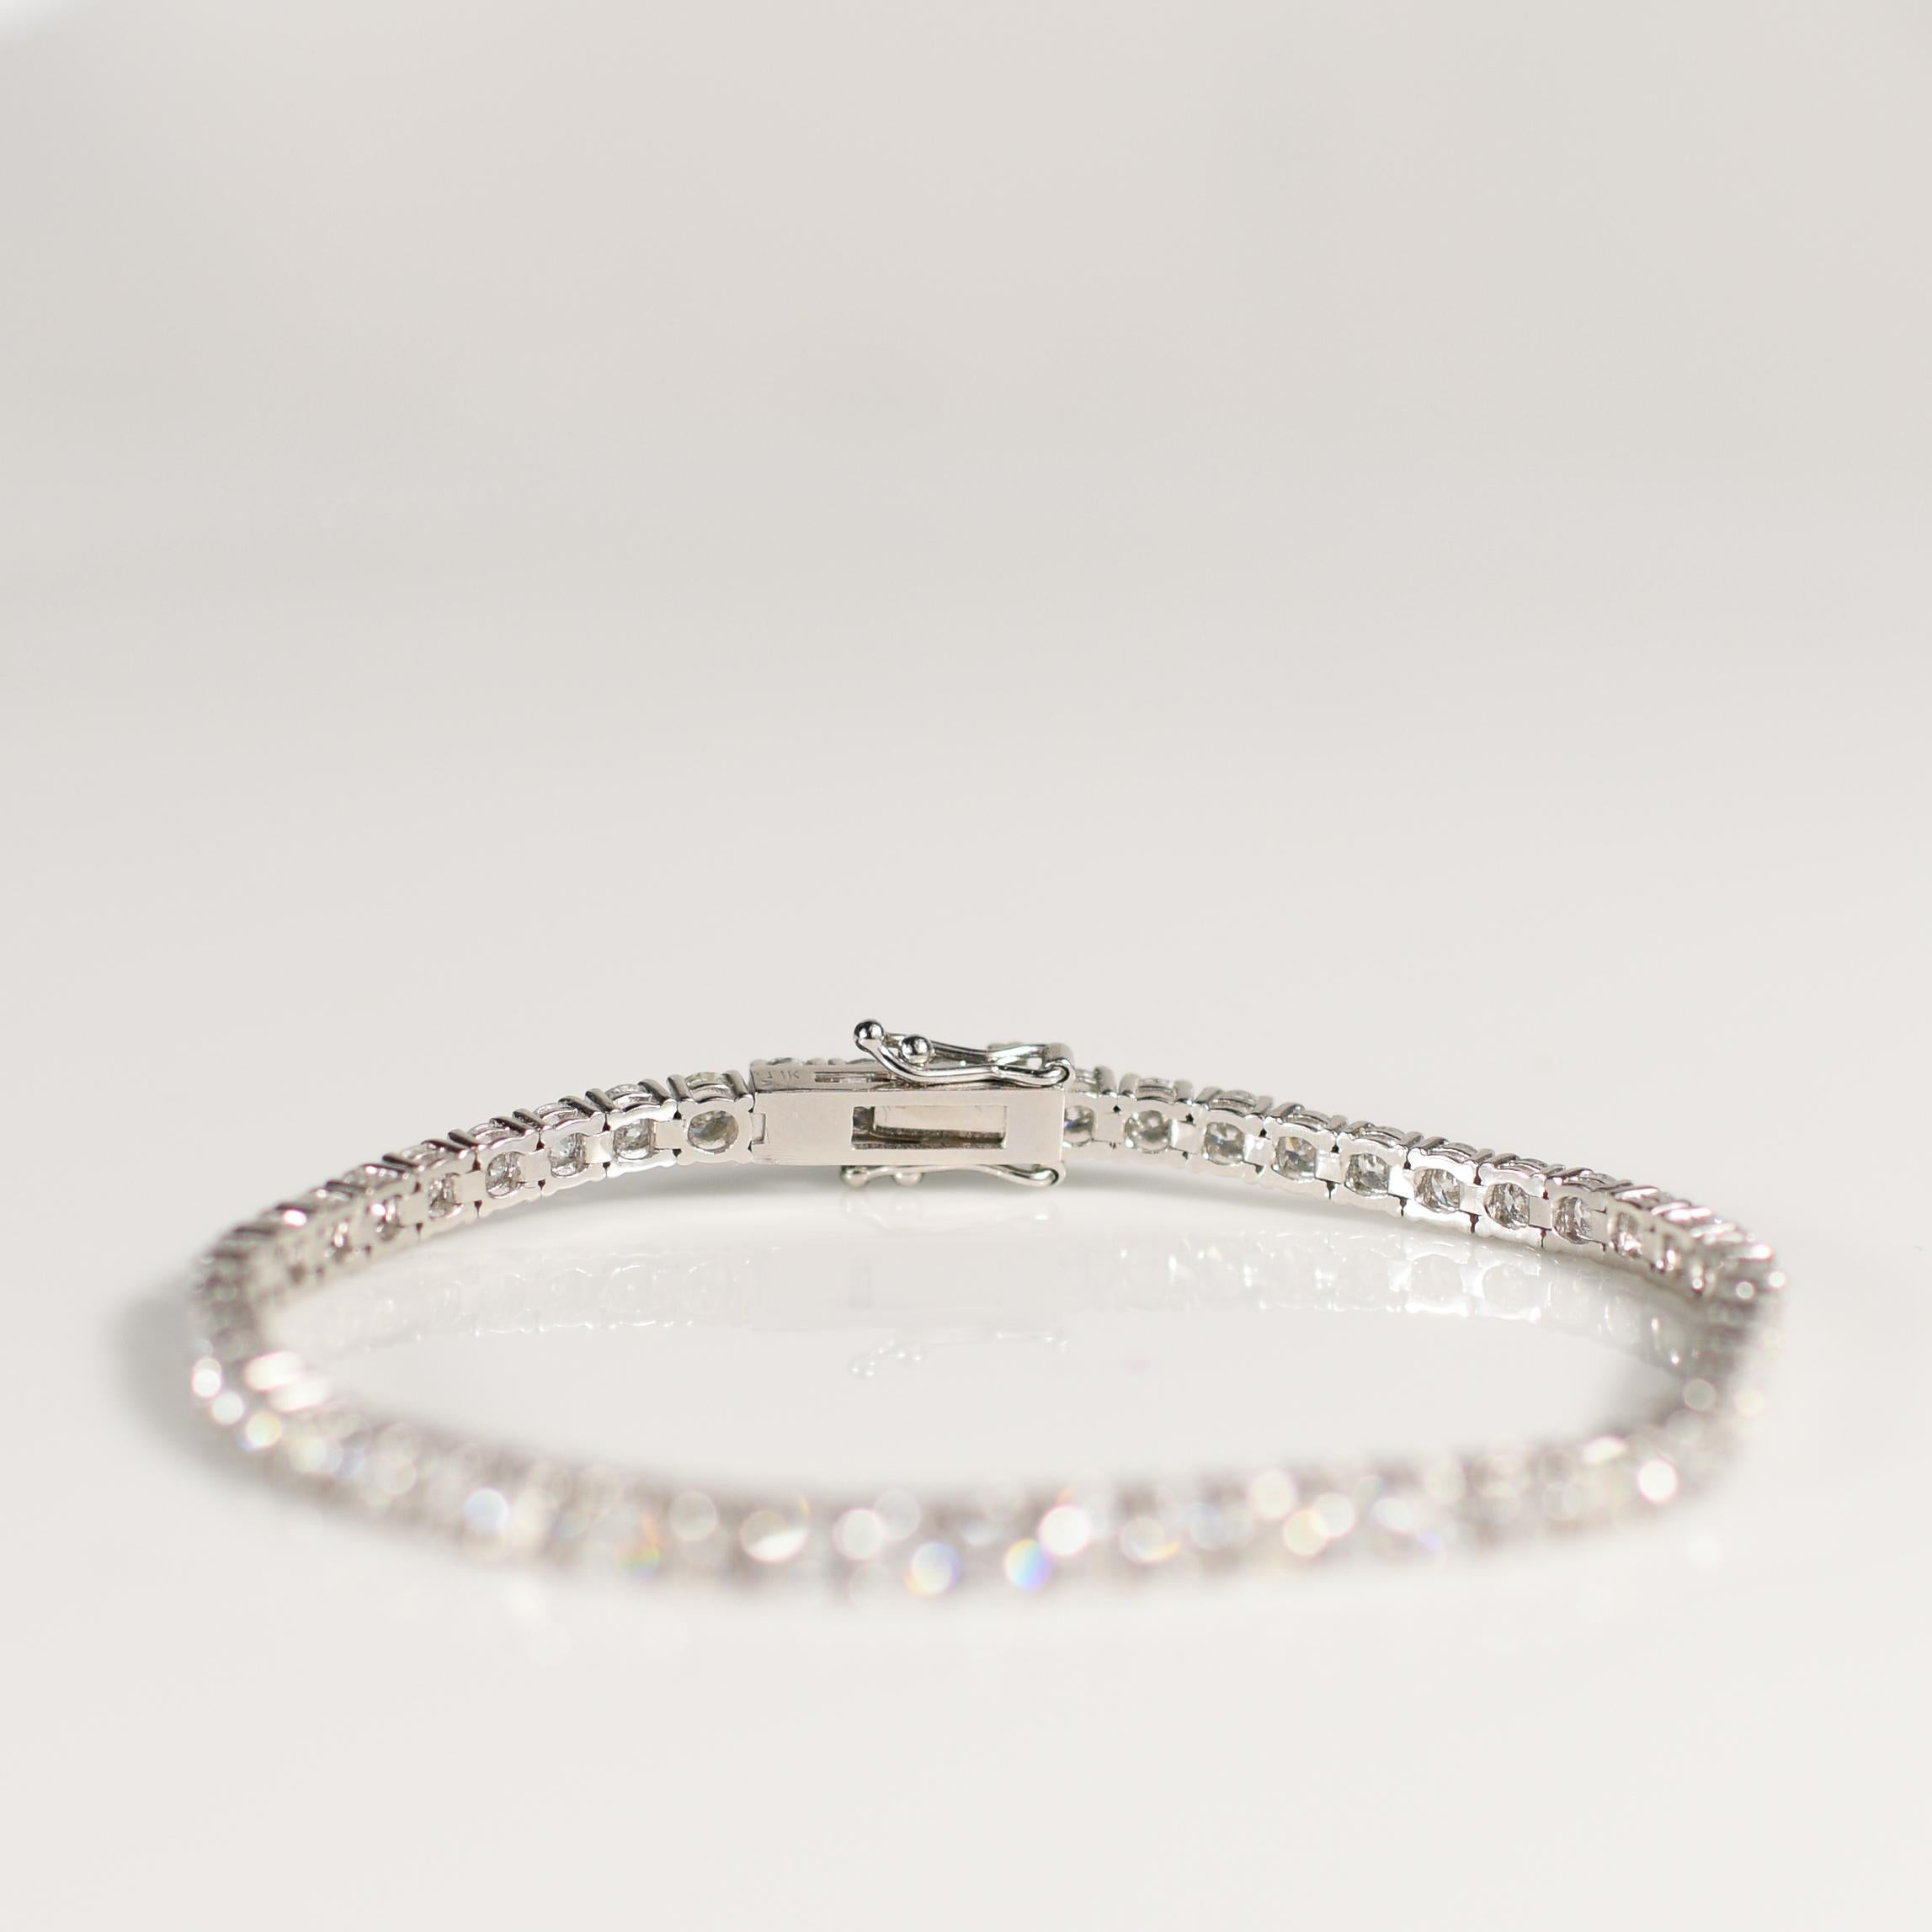 7.34ctw Round Brilliant Natural Diamond Tennis Bracelet in 14K White Gold In Good Condition For Sale In Addison, TX